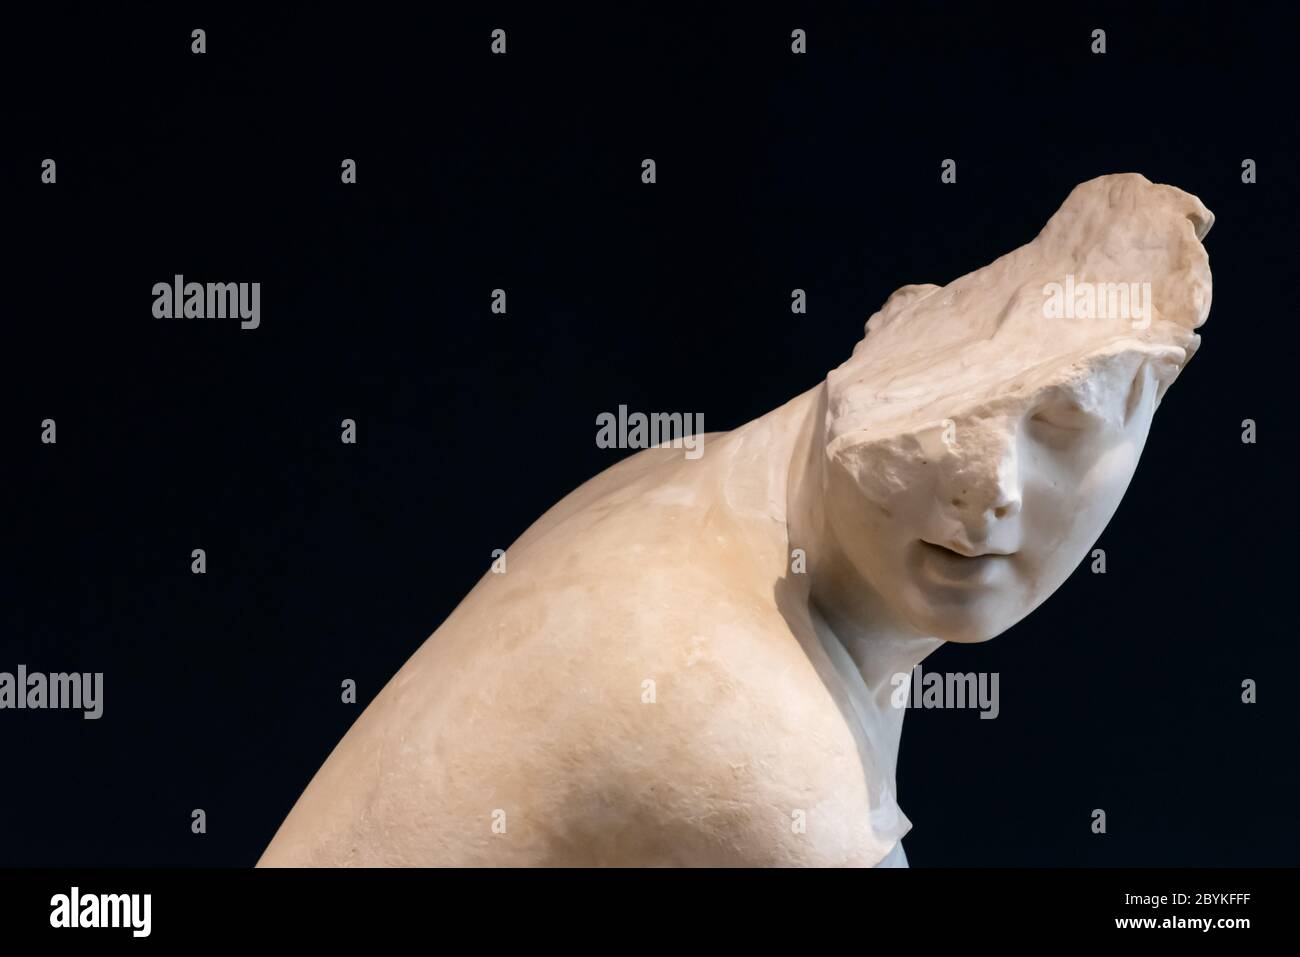 Ancient roman statue of young person with a broken face Stock Photo